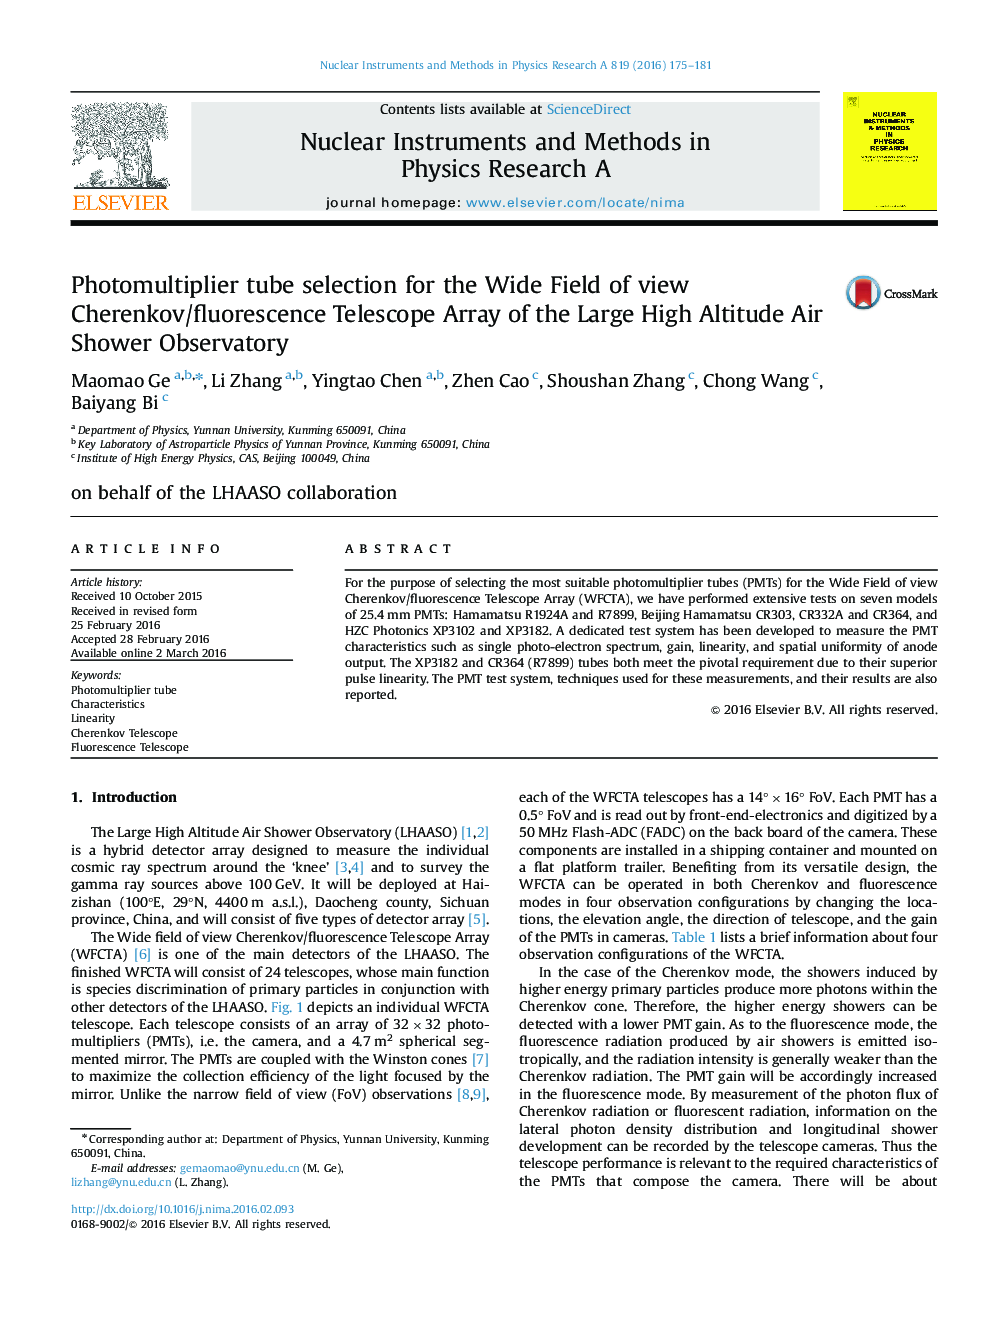 Photomultiplier tube selection for the Wide Field of view Cherenkov/fluorescence Telescope Array of the Large High Altitude Air Shower Observatory